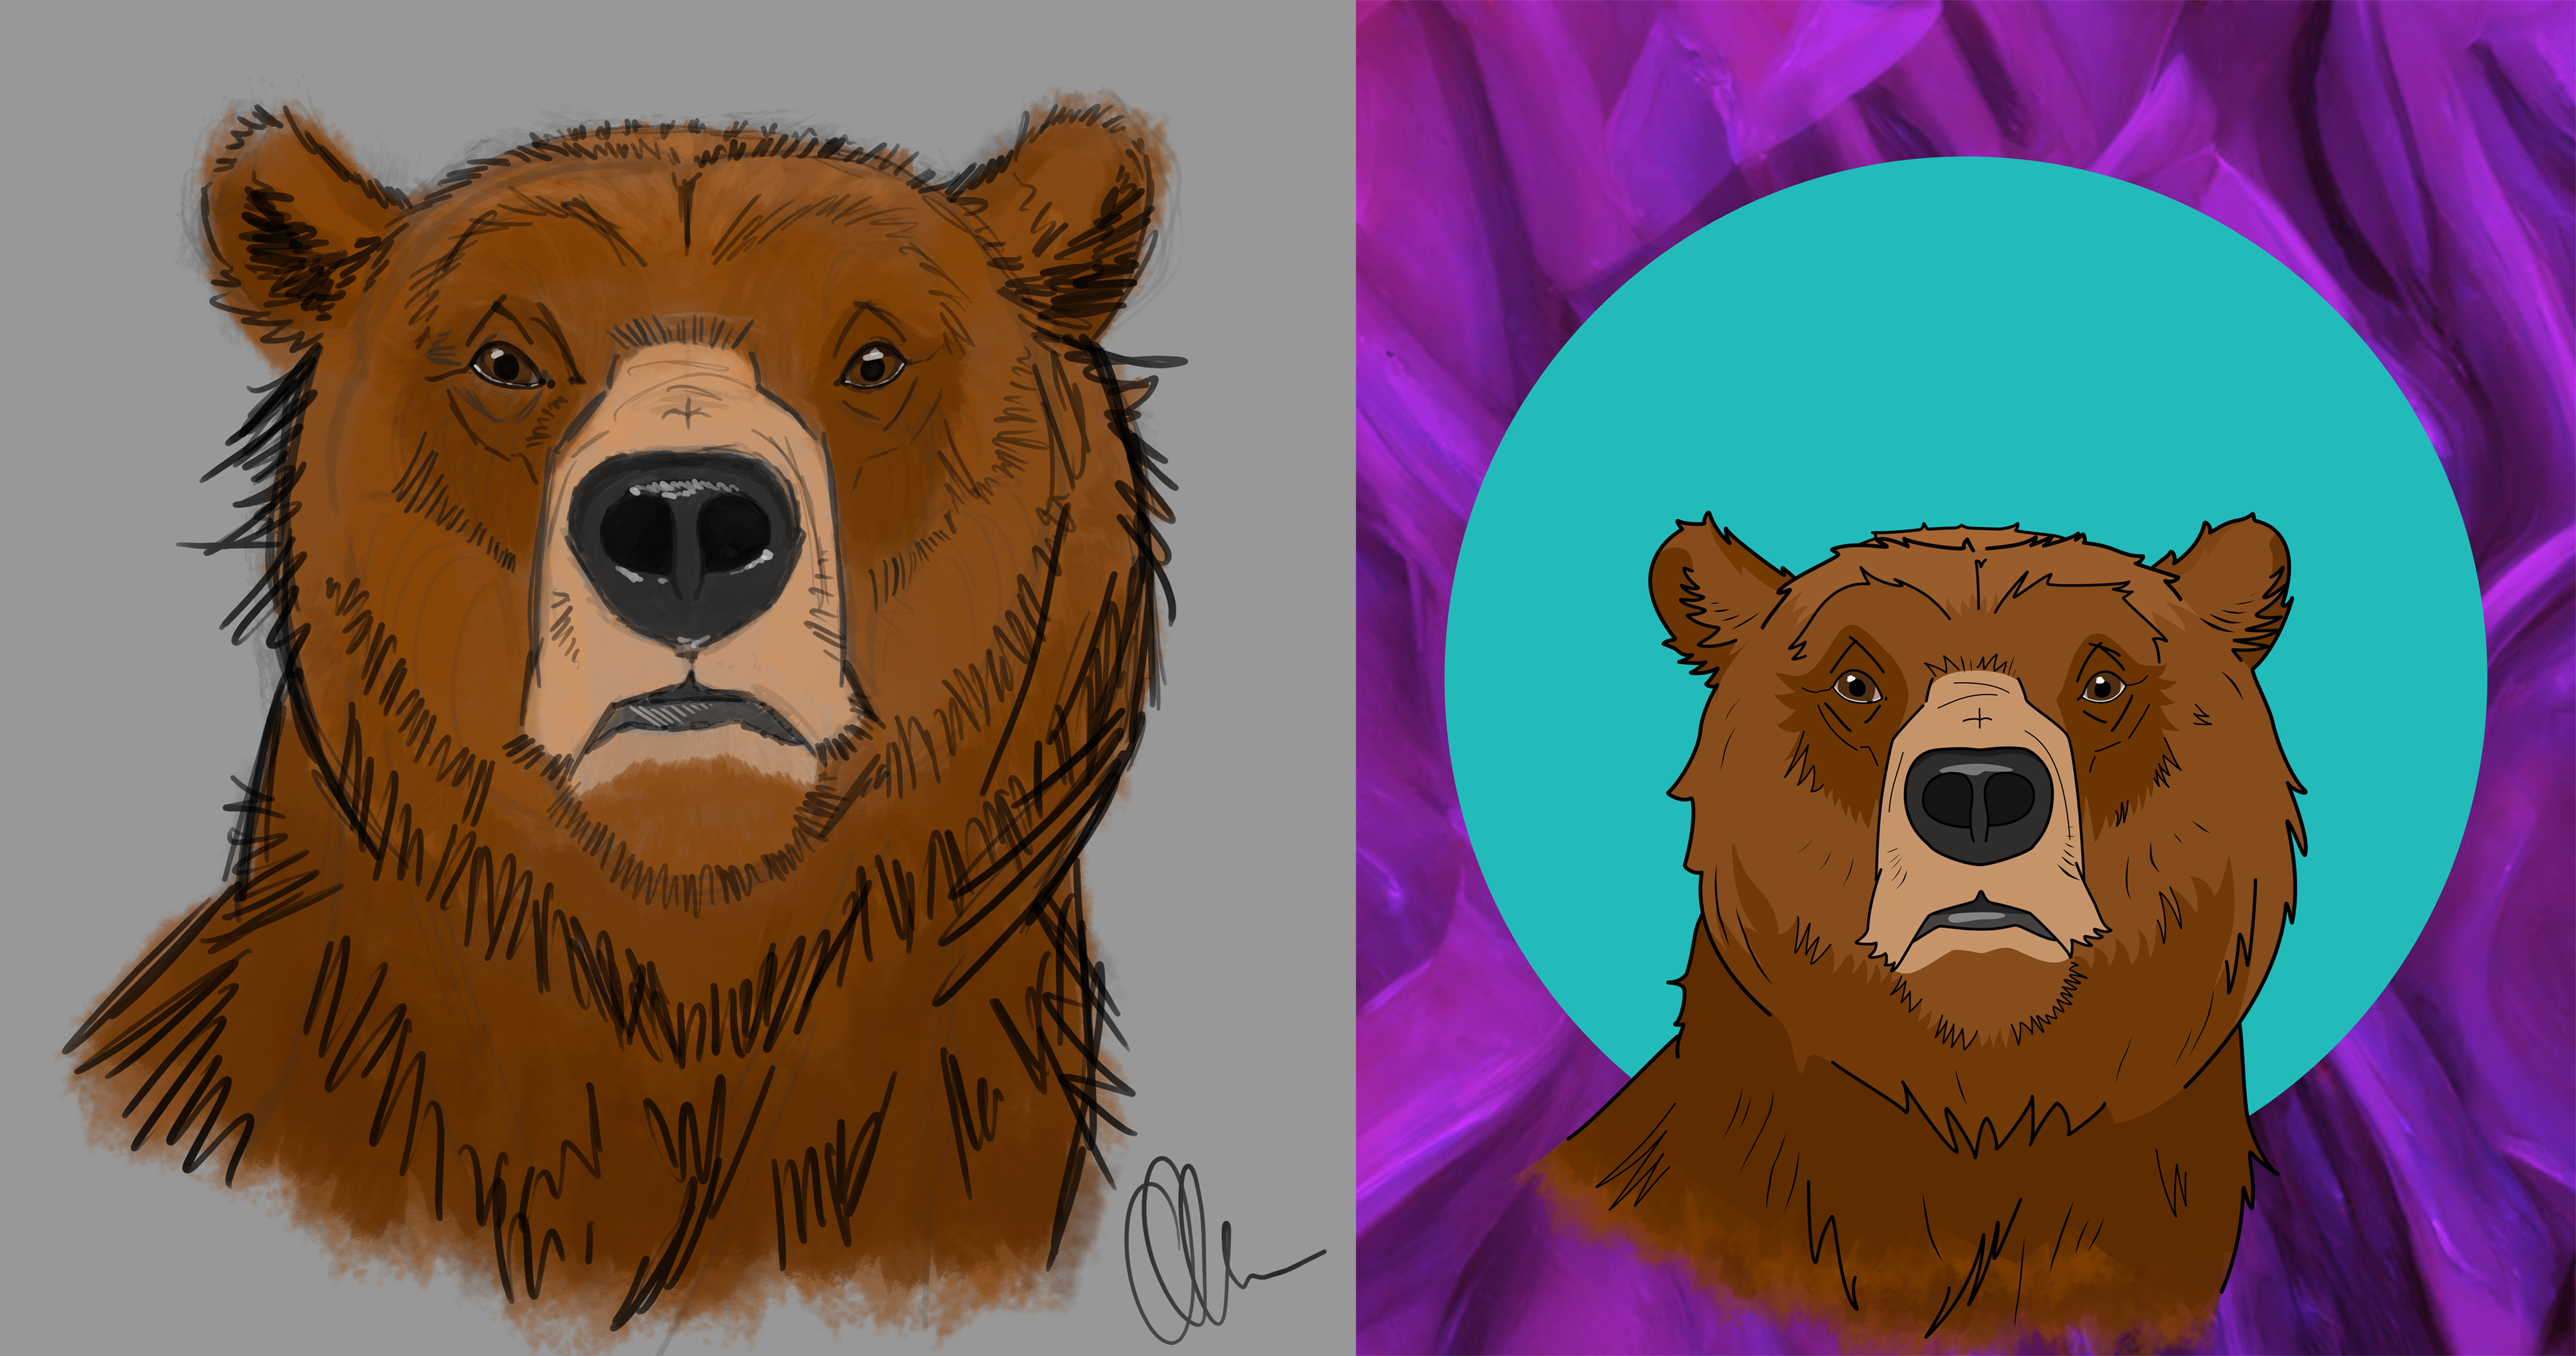 Photoshop painting of a grizzly bear